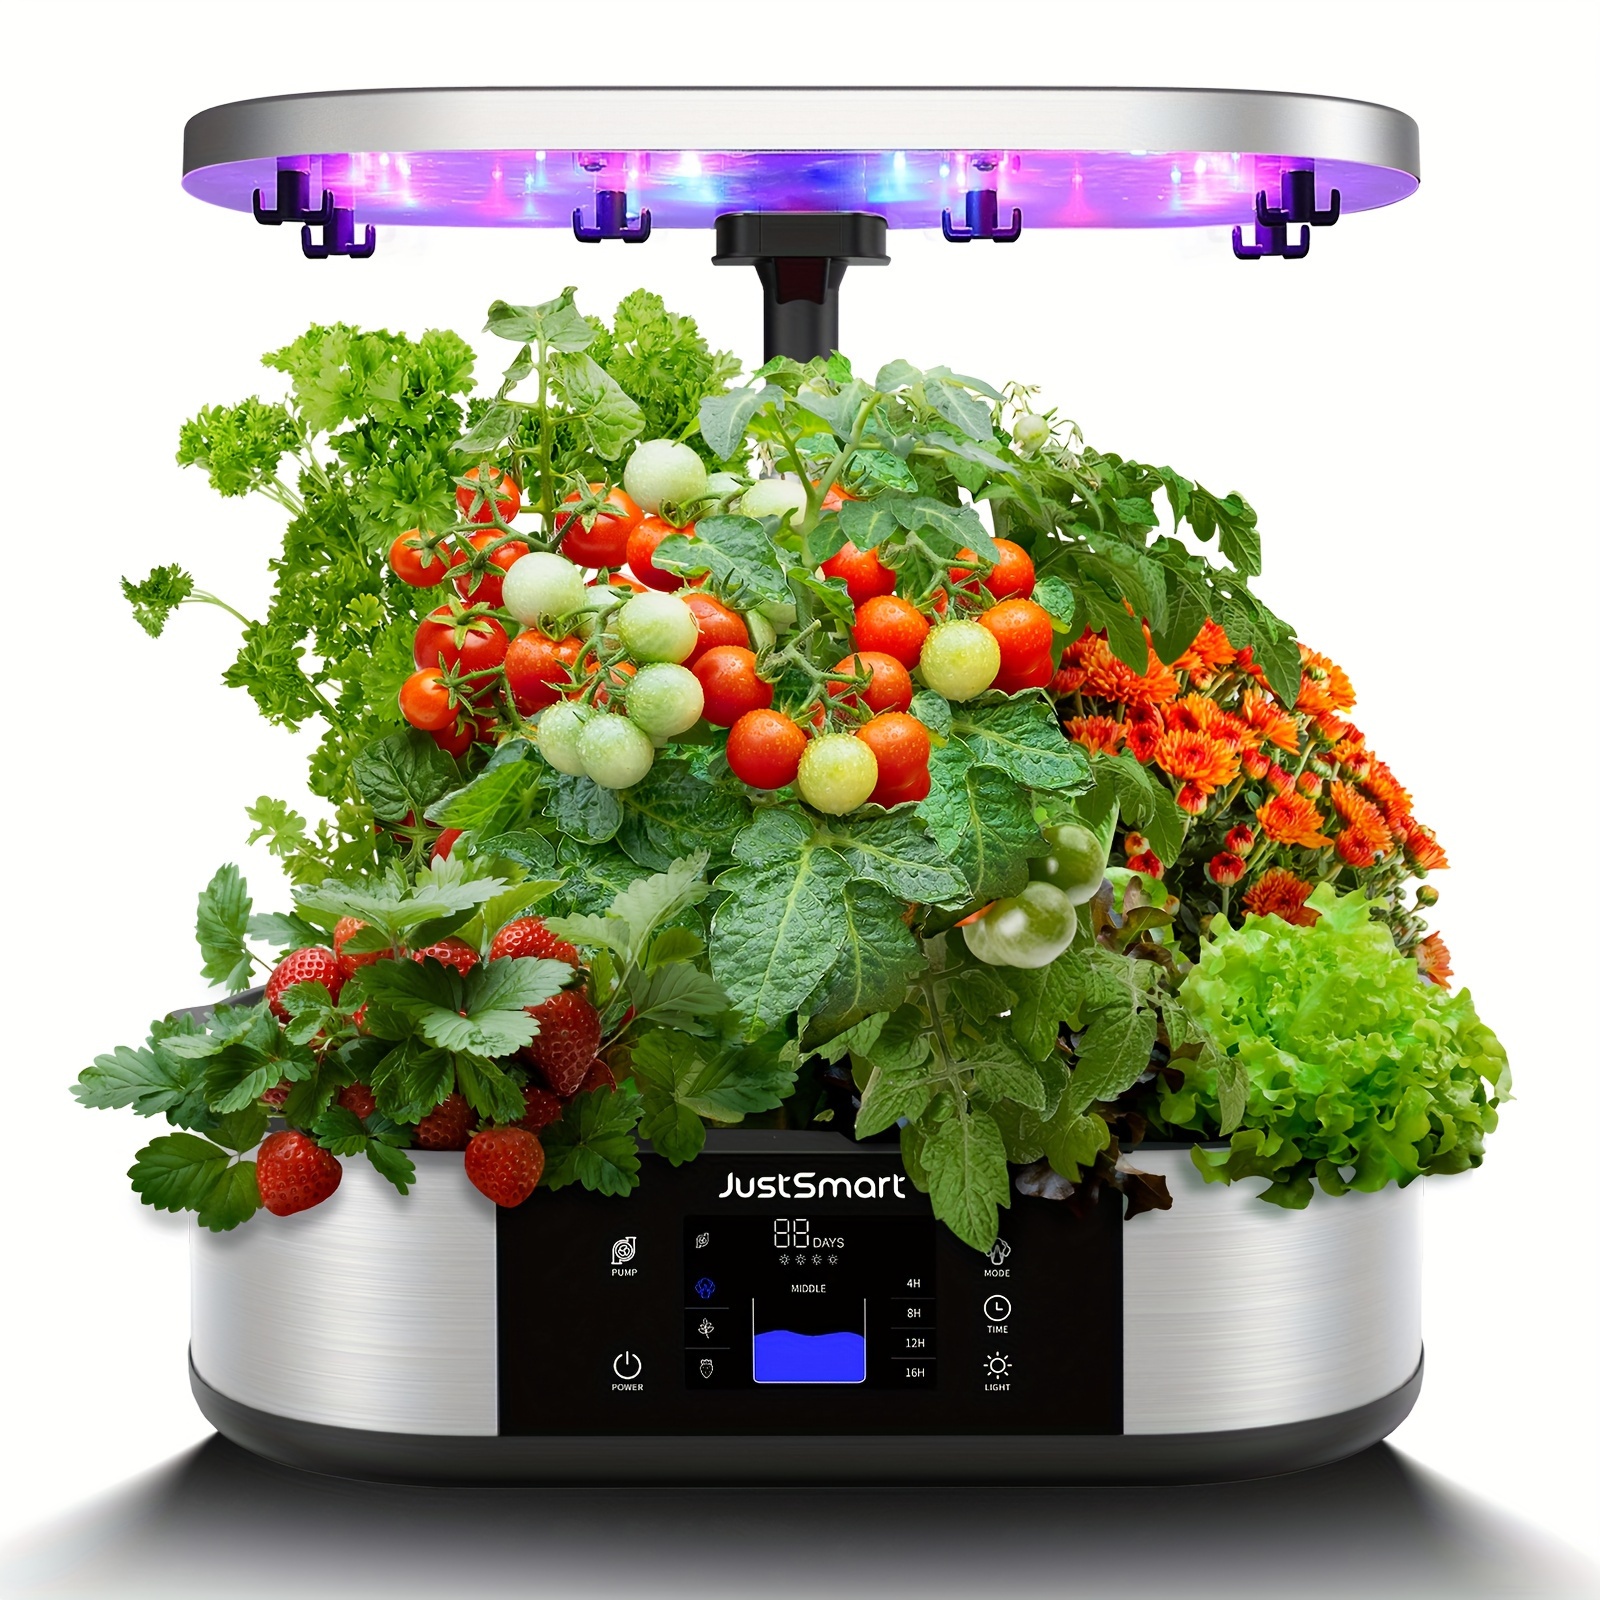 

12 Pods Smart Hydroponics Growing System Indoor Garden, 3 Planting Modes, Up To 30", 120 Led Light, Fixed Hook, Automatic Timer, Silent Pump System For Gardening, Gs1 Lite